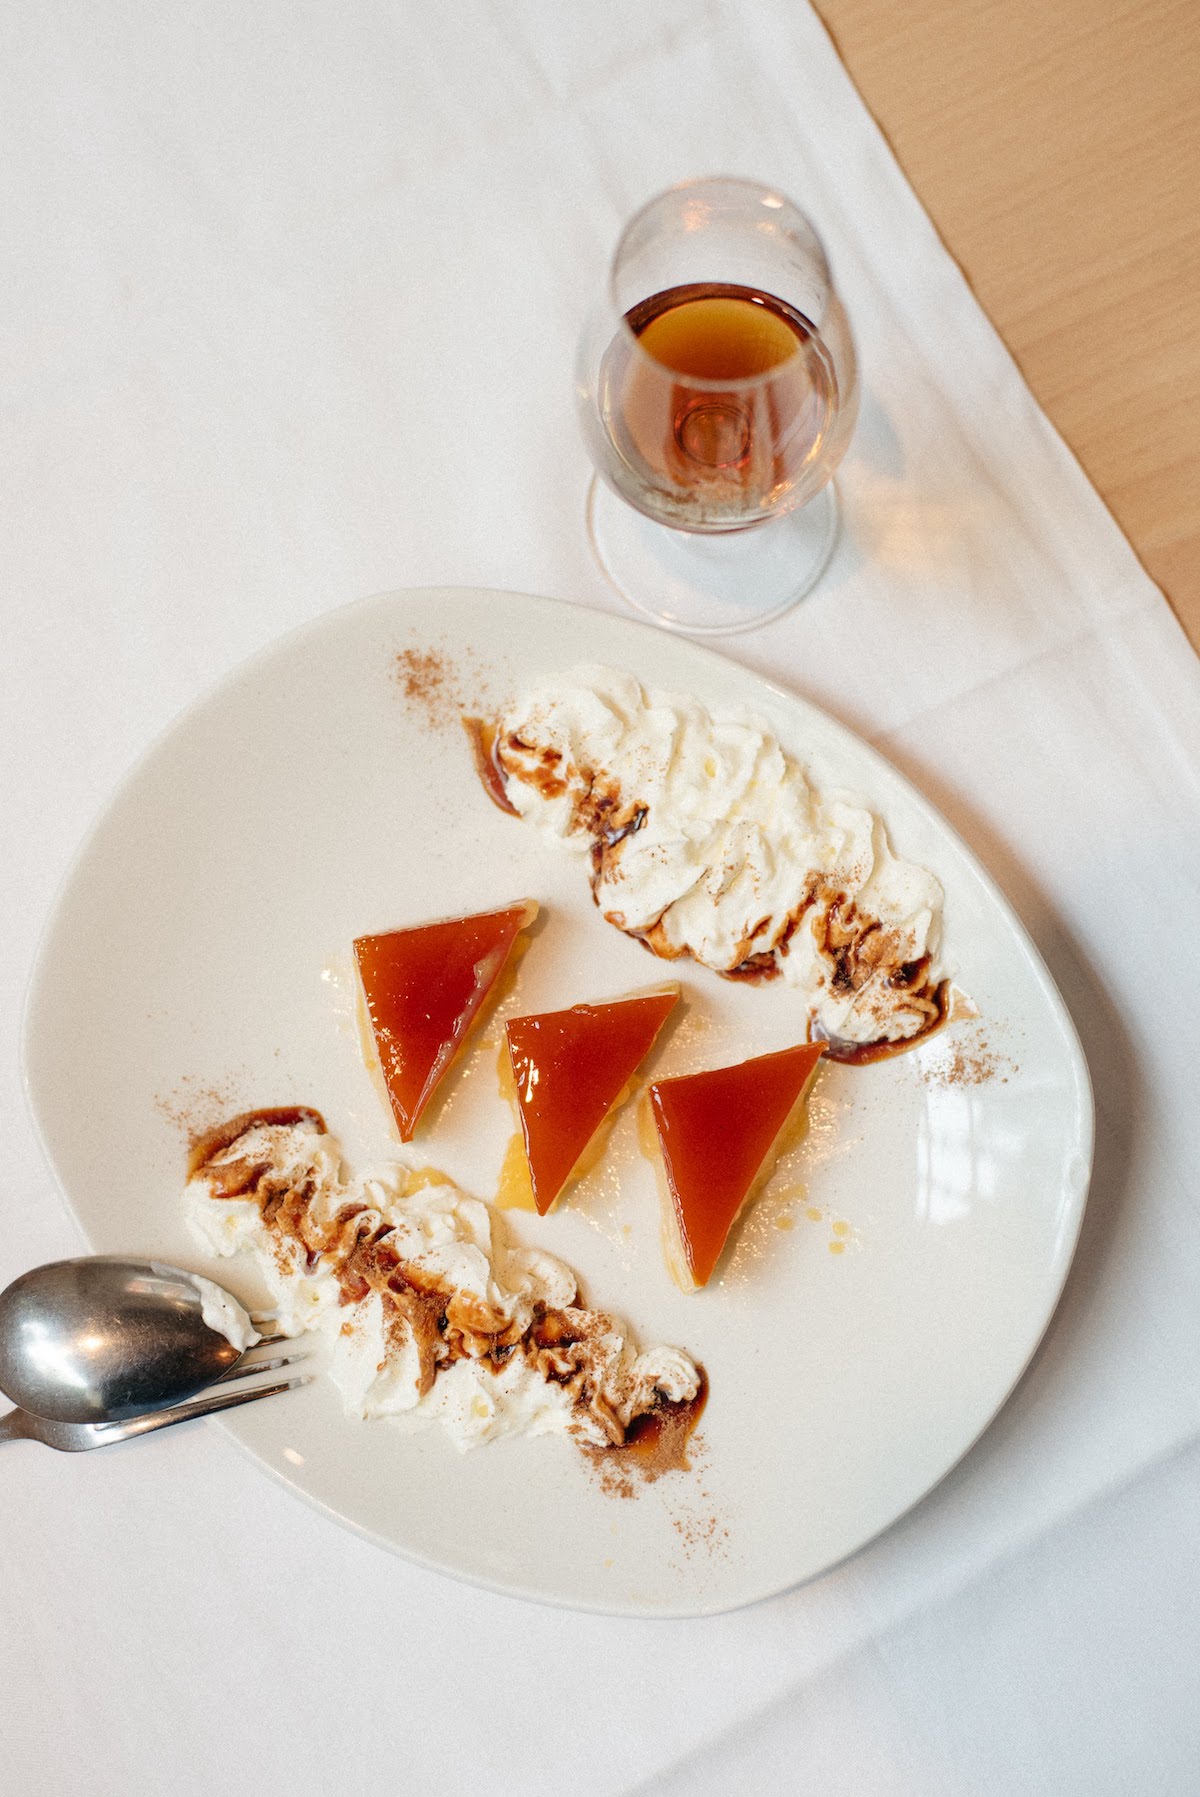 Three triangle-shaped pieces of tocino de cielo, a Spanish dessert, on a plate decorated with whipped cream beside a glass of brown dessert wine.